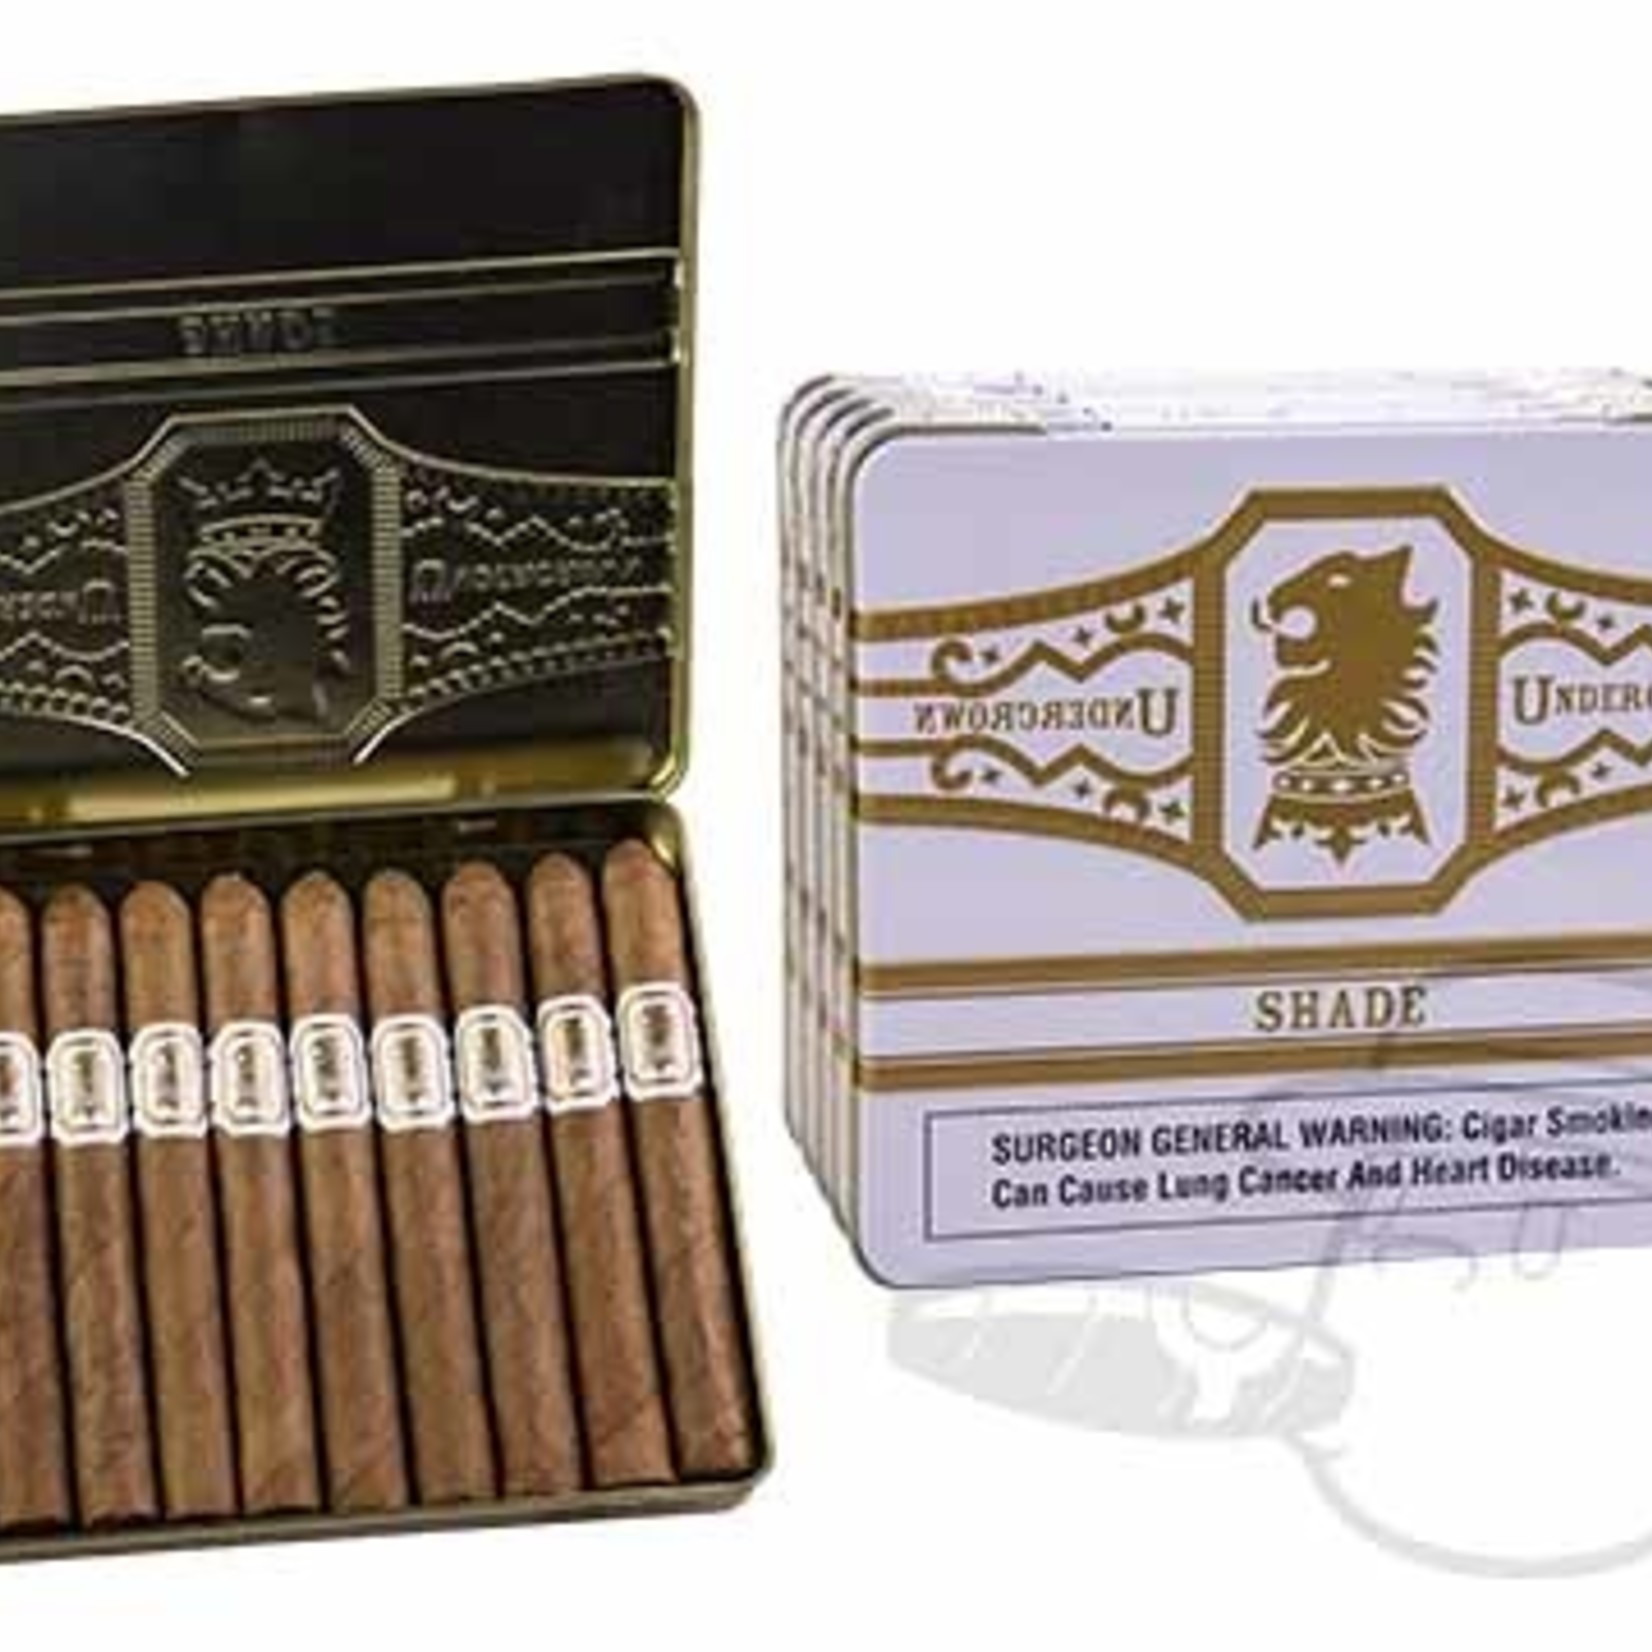 Undercrown UNDERCROWN SHADE CORONETS 4X32 TINS